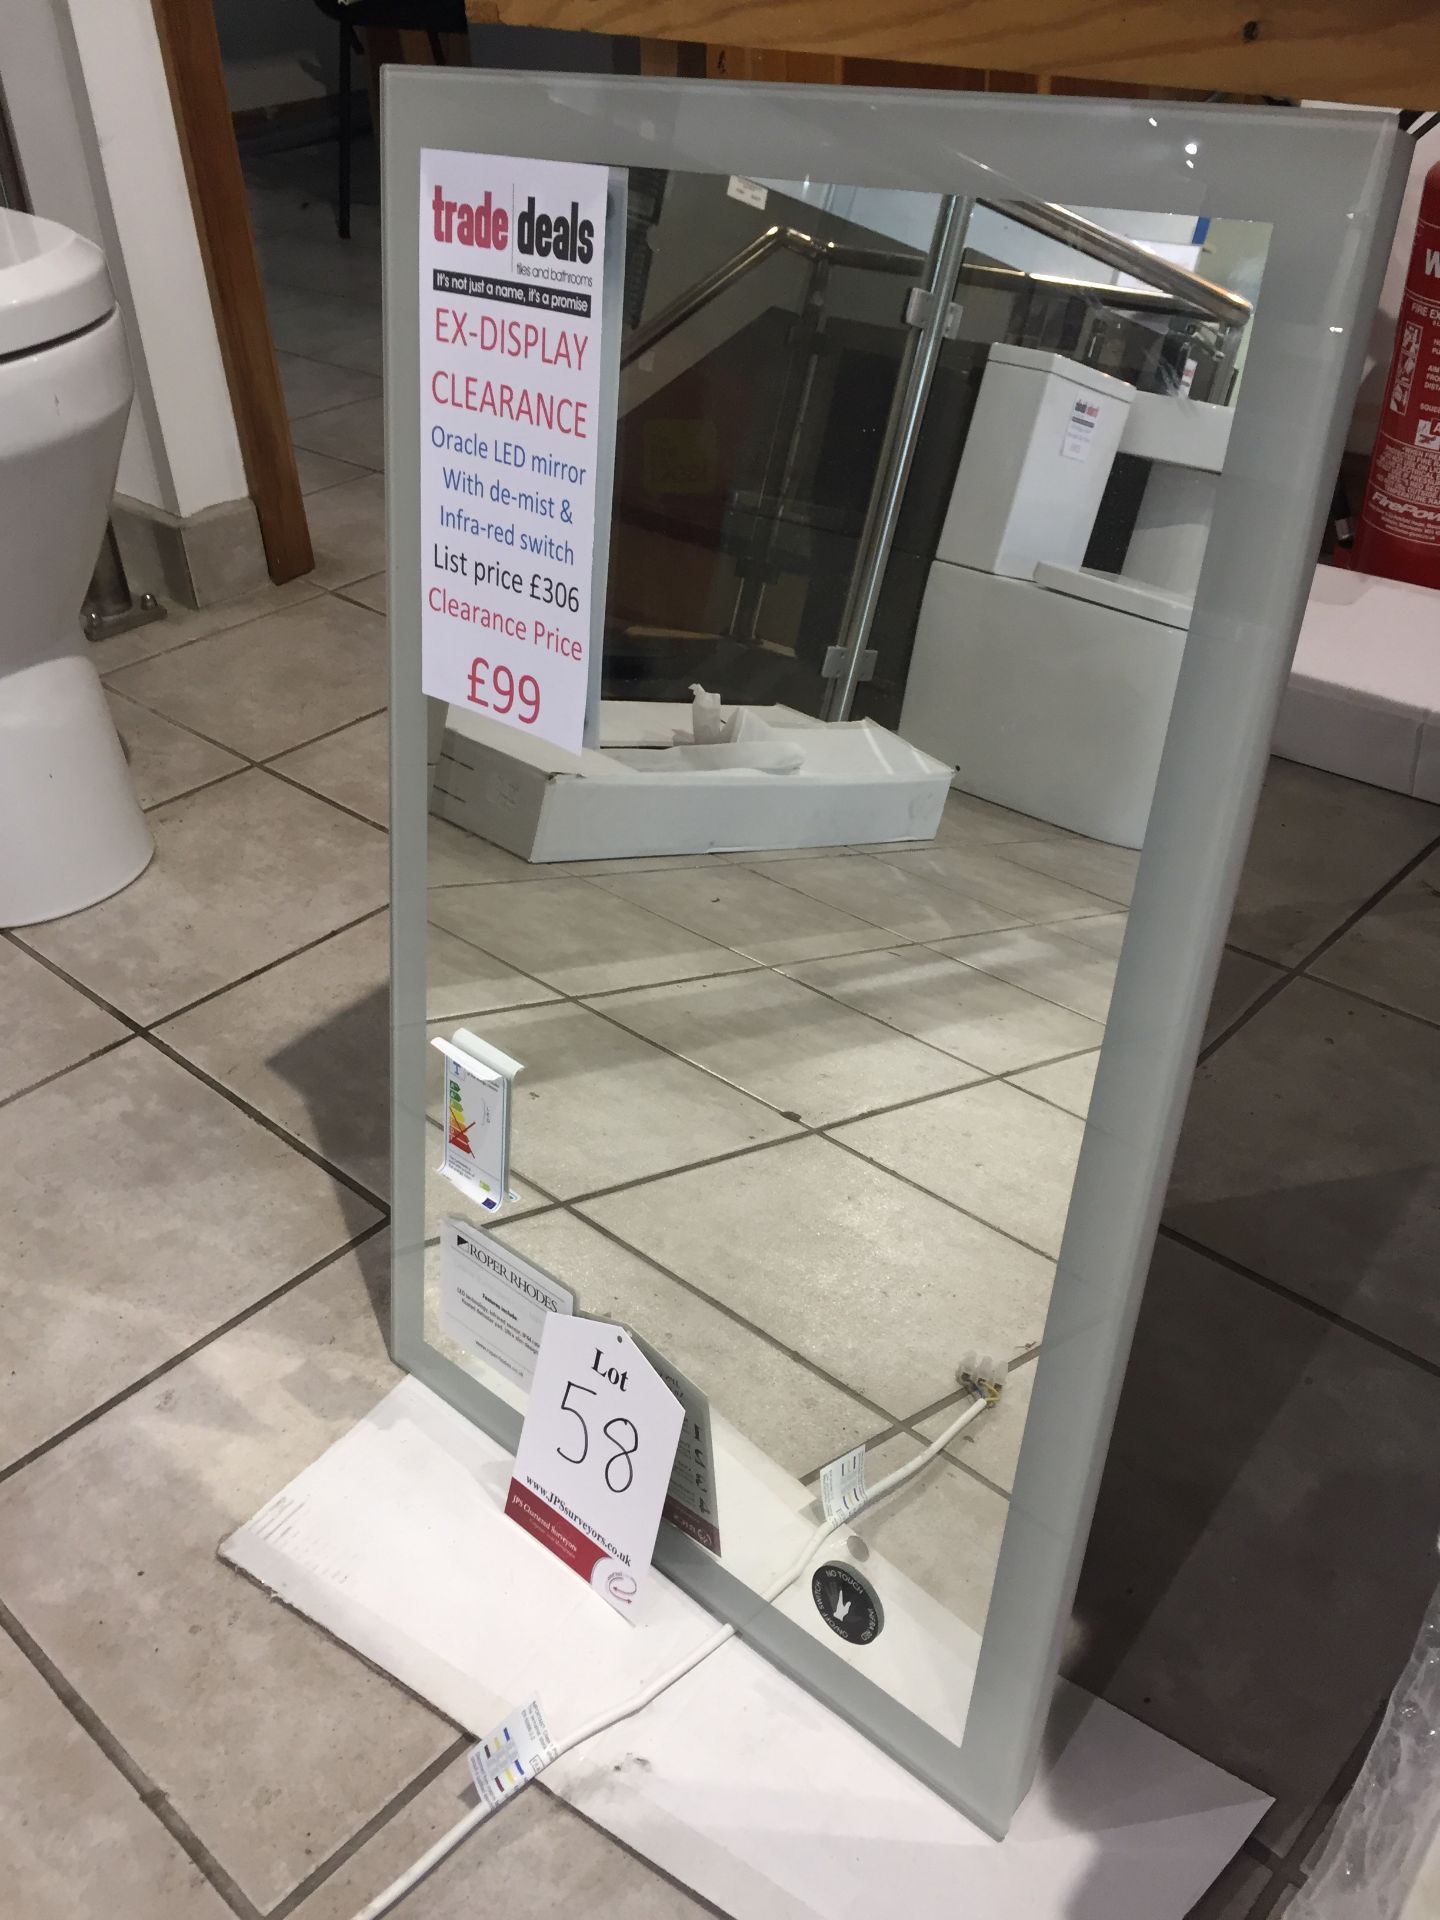 Oracle LED mirror w/ de-mist & infrared switch (450x700mm) £300 reduced to £99 - Image 2 of 2